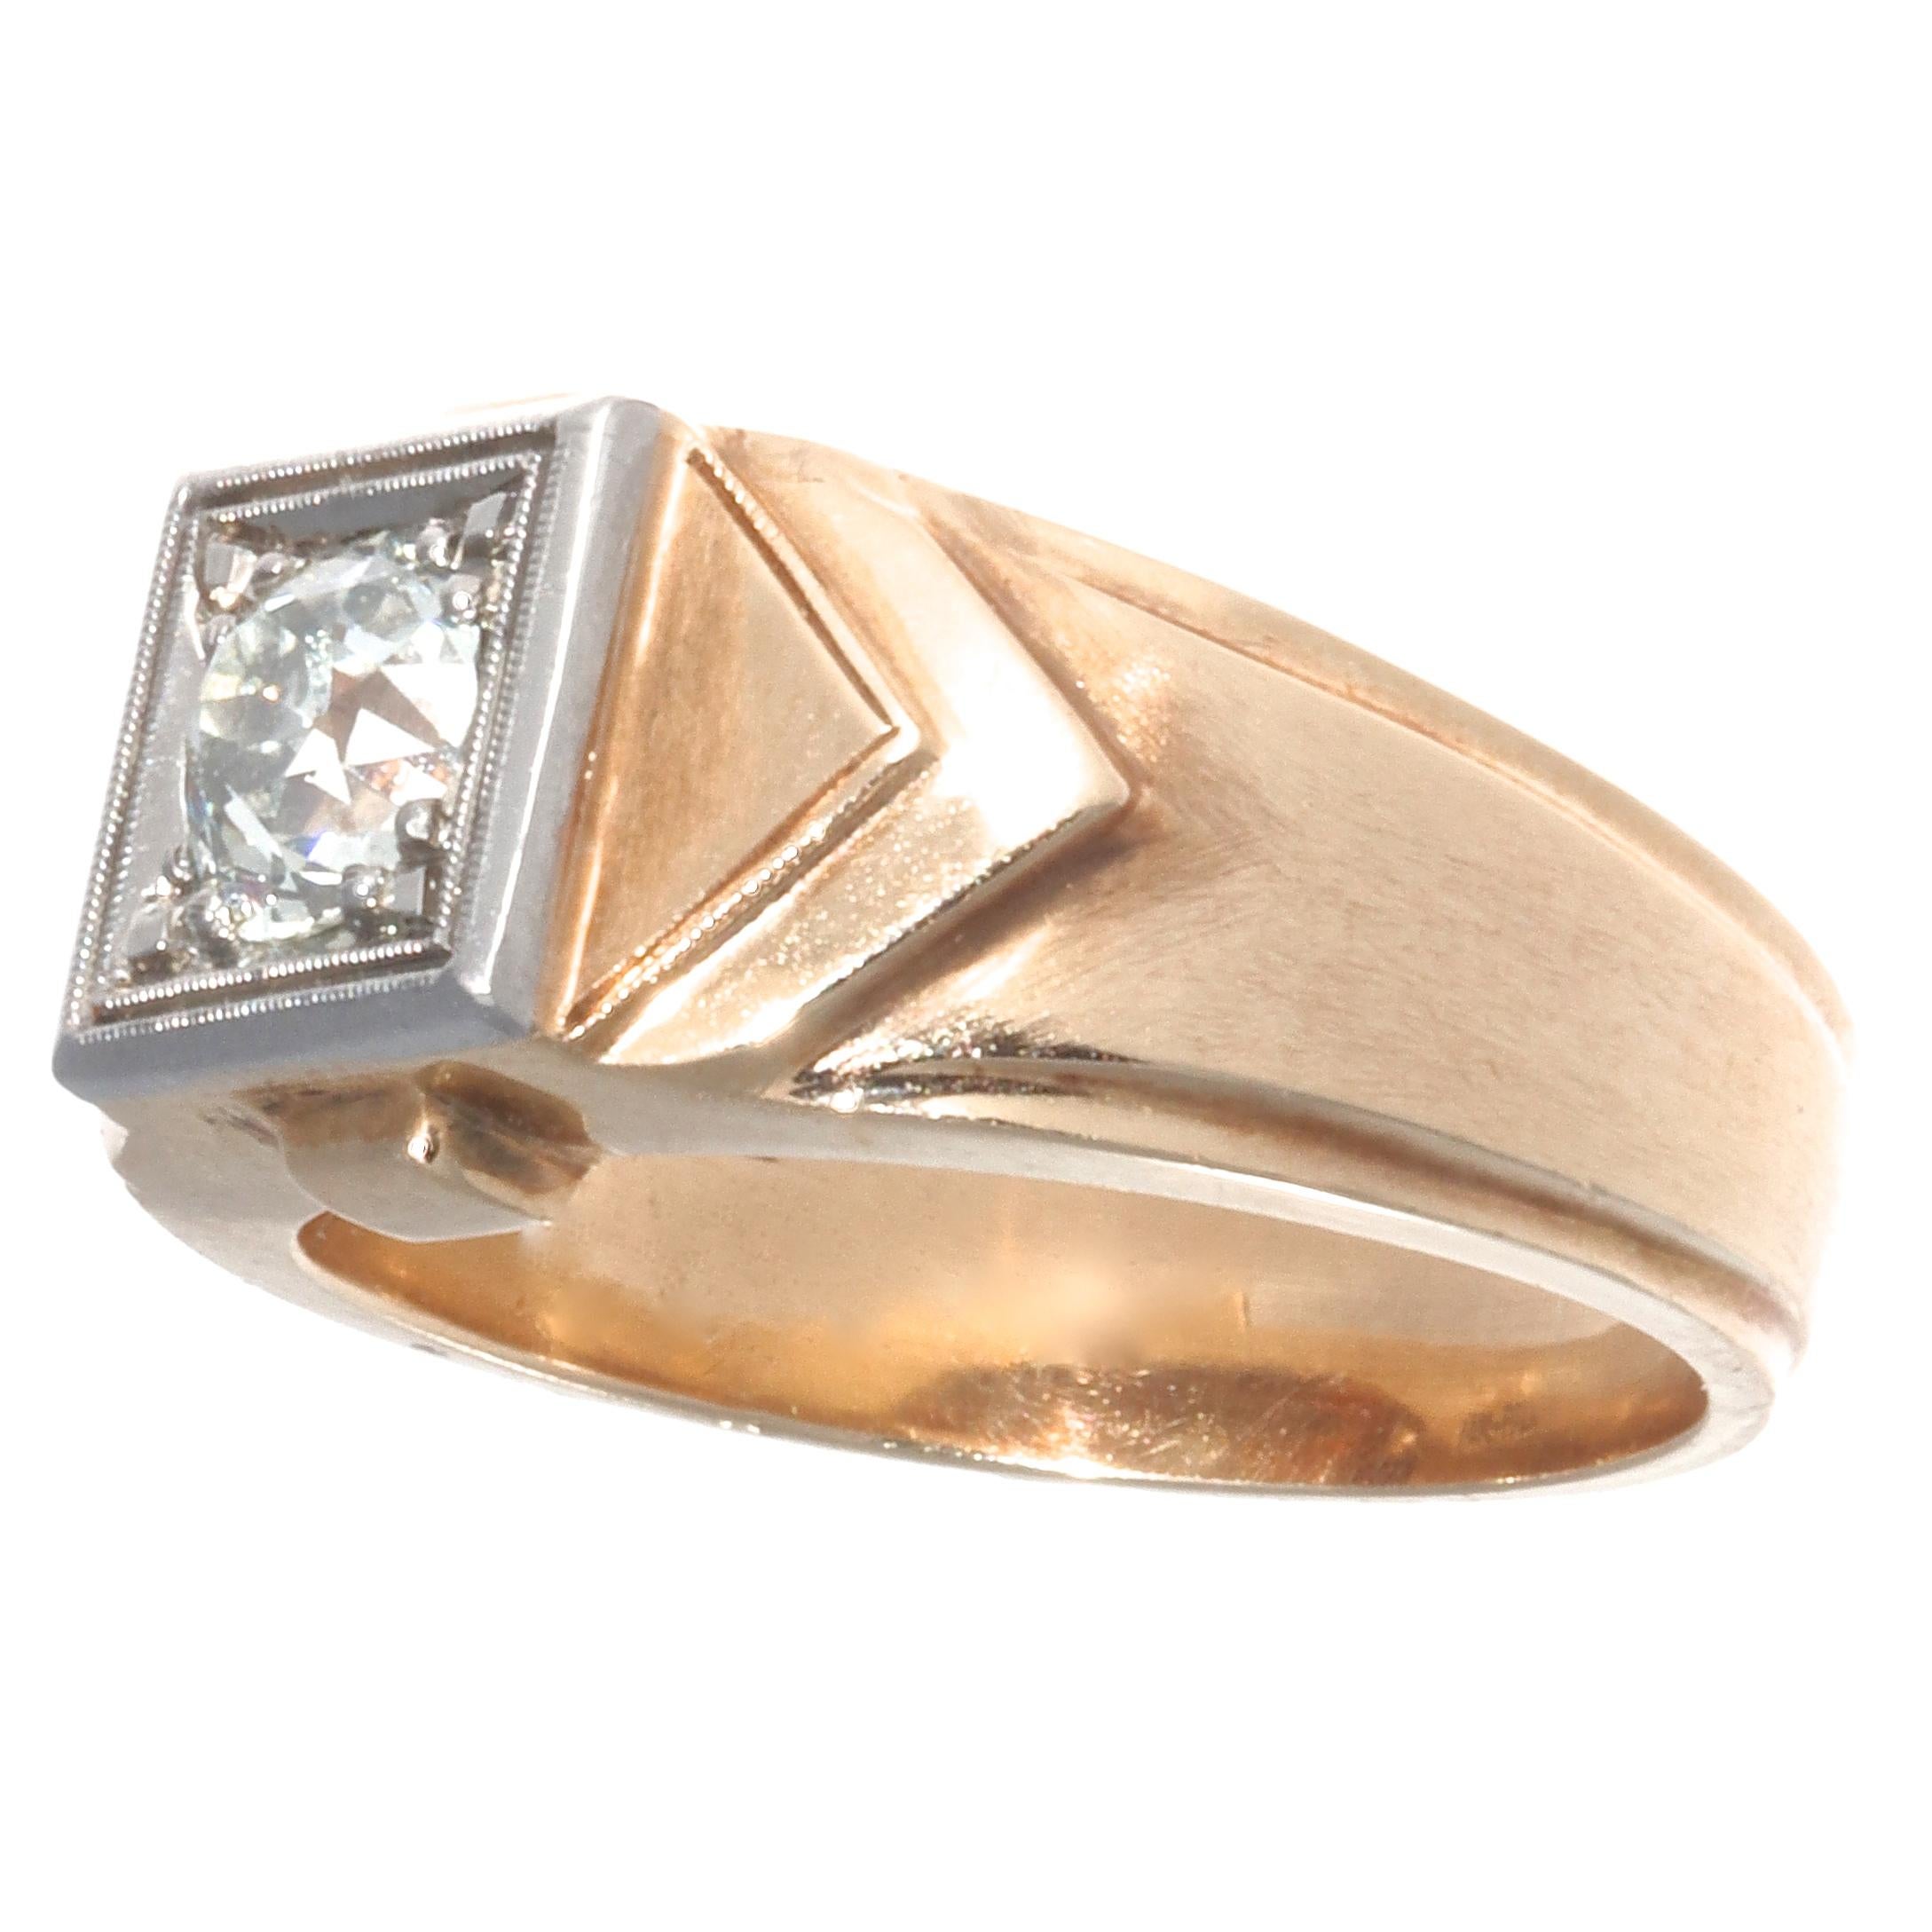 The retro period was all about bold, gold, statement pieces. And this ring is no exception. This sophisticated, unisex retro diamond  ring features an old mine cut diamond, approximately 1.00 carat, O-P color, SI1 clarity. The diamond is set in